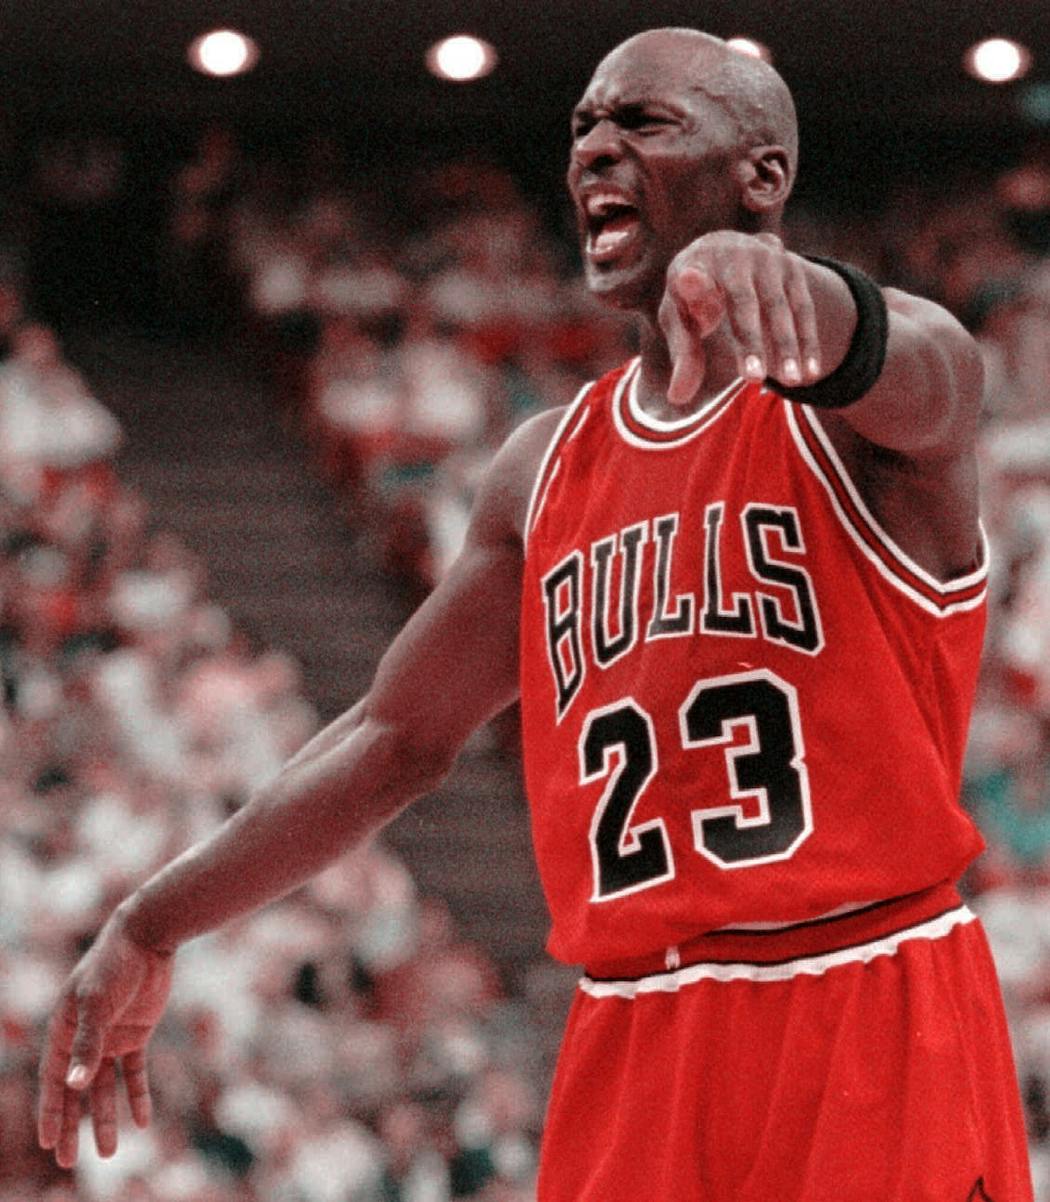 Michael Jordan, wearing his old jersey, gives direction from the court during NBA Eastern Conference semifinals play in Orlando